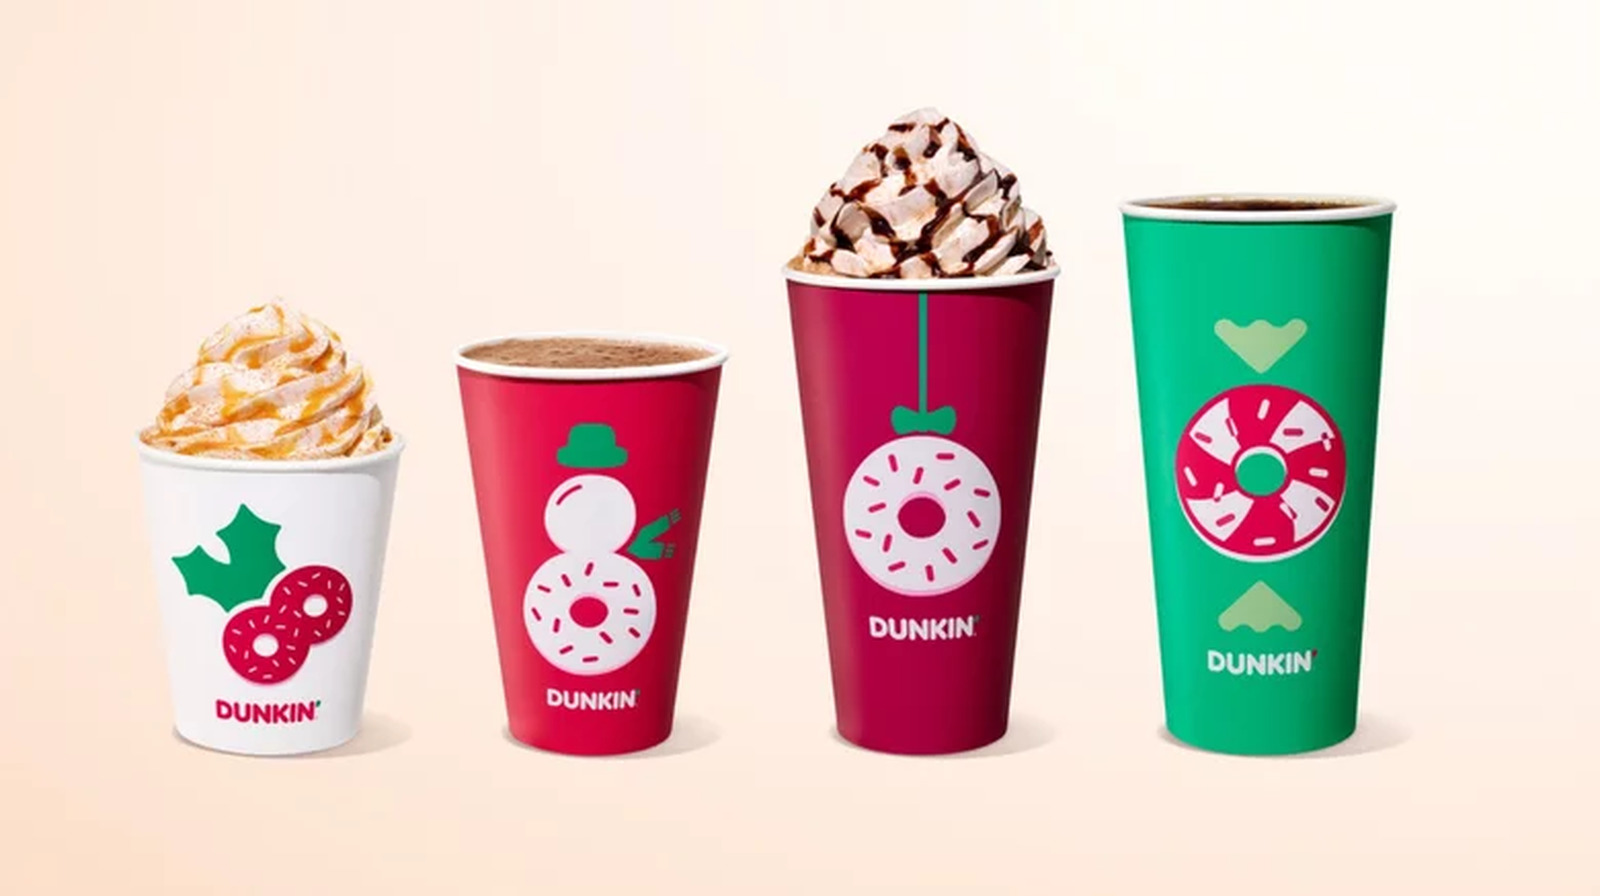 https://www.thedailymeal.com/img/gallery/dunkins-2023-holiday-menu-has-apparently-been-leaked-heres-what-to-expect/l-intro-1697557731.jpg